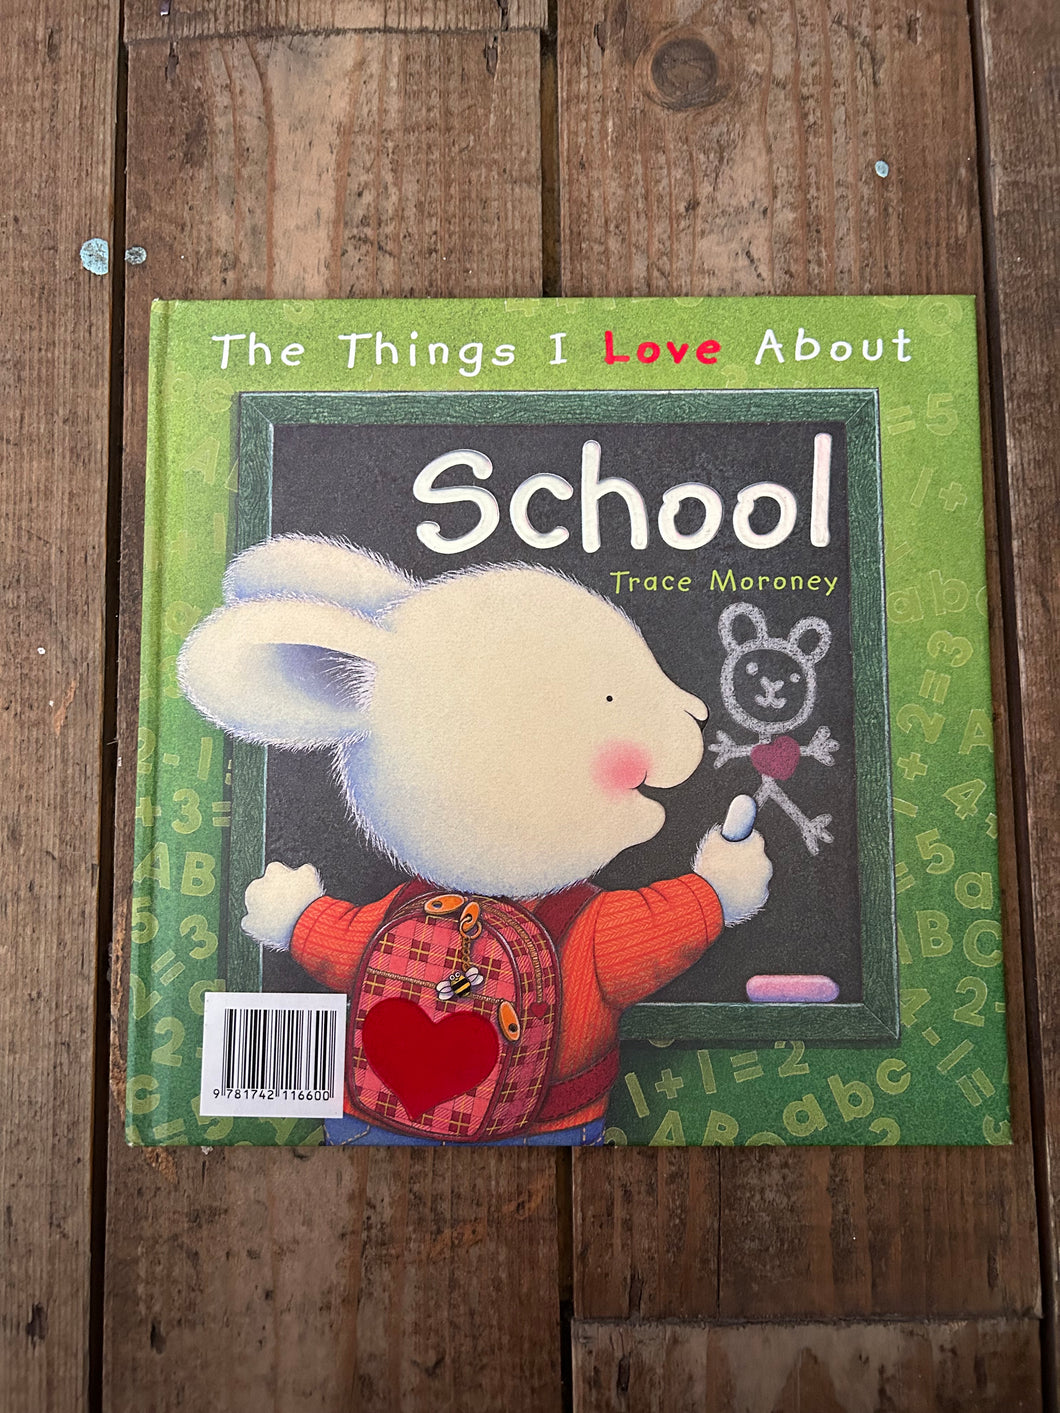 The things I love about school by Trace Moroney